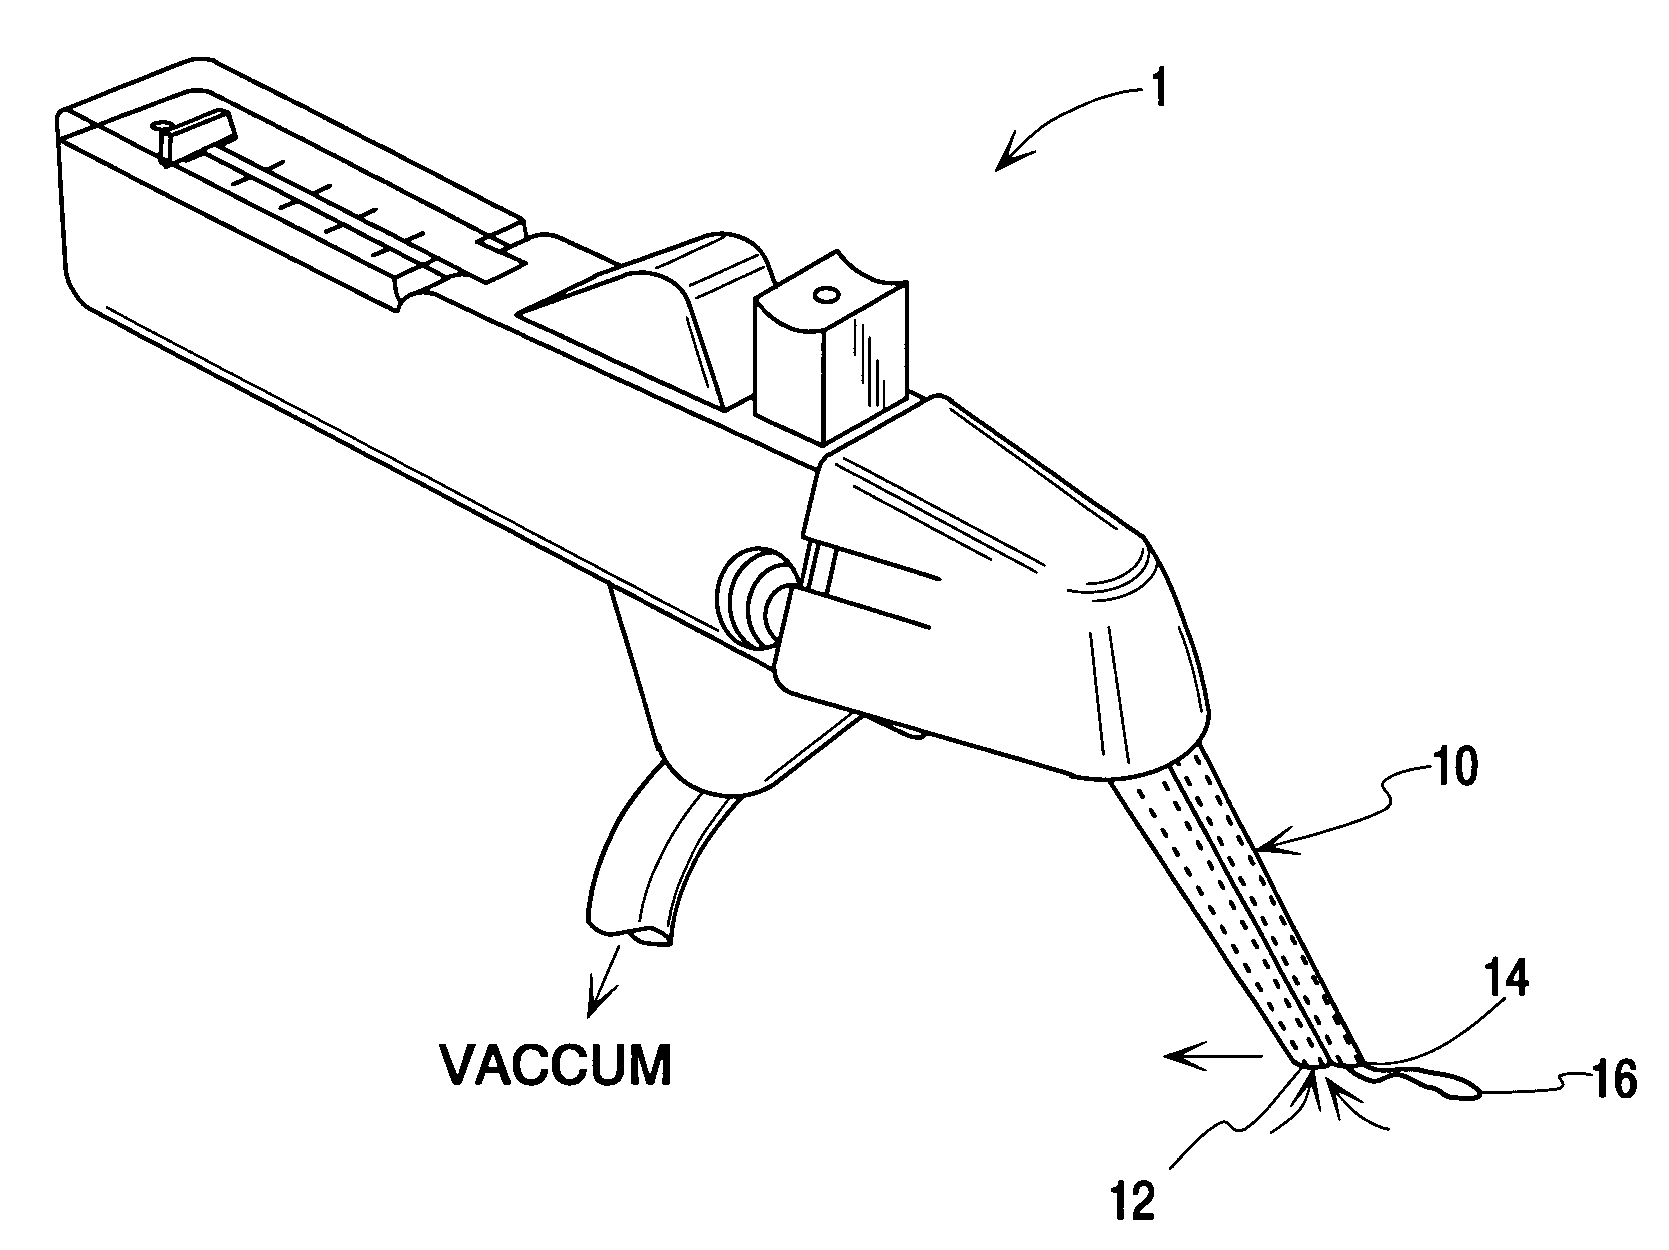 Medical suctioning apparatus and methods of use